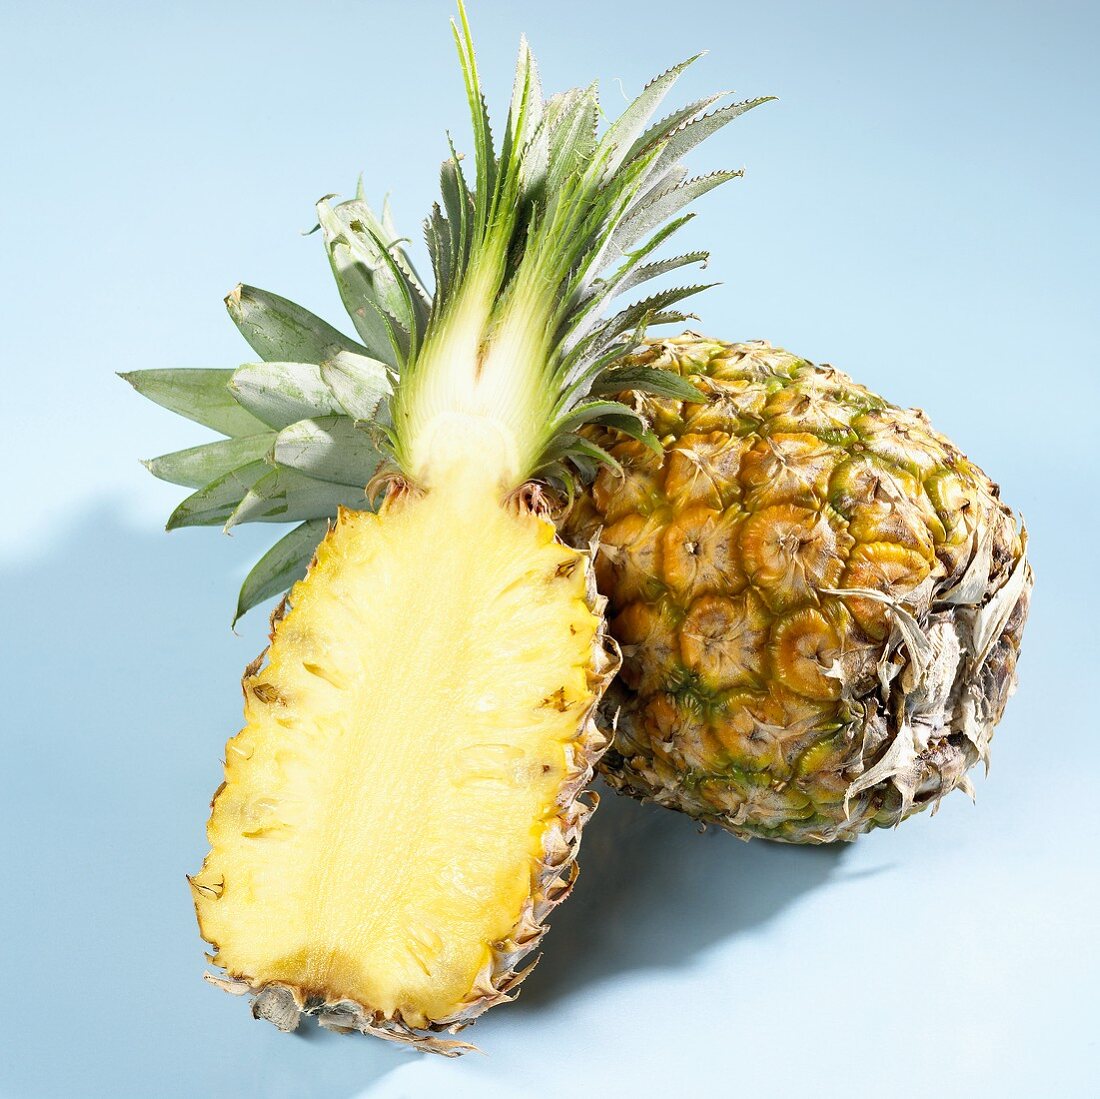 Half a pineapple in front of a whole pineapple